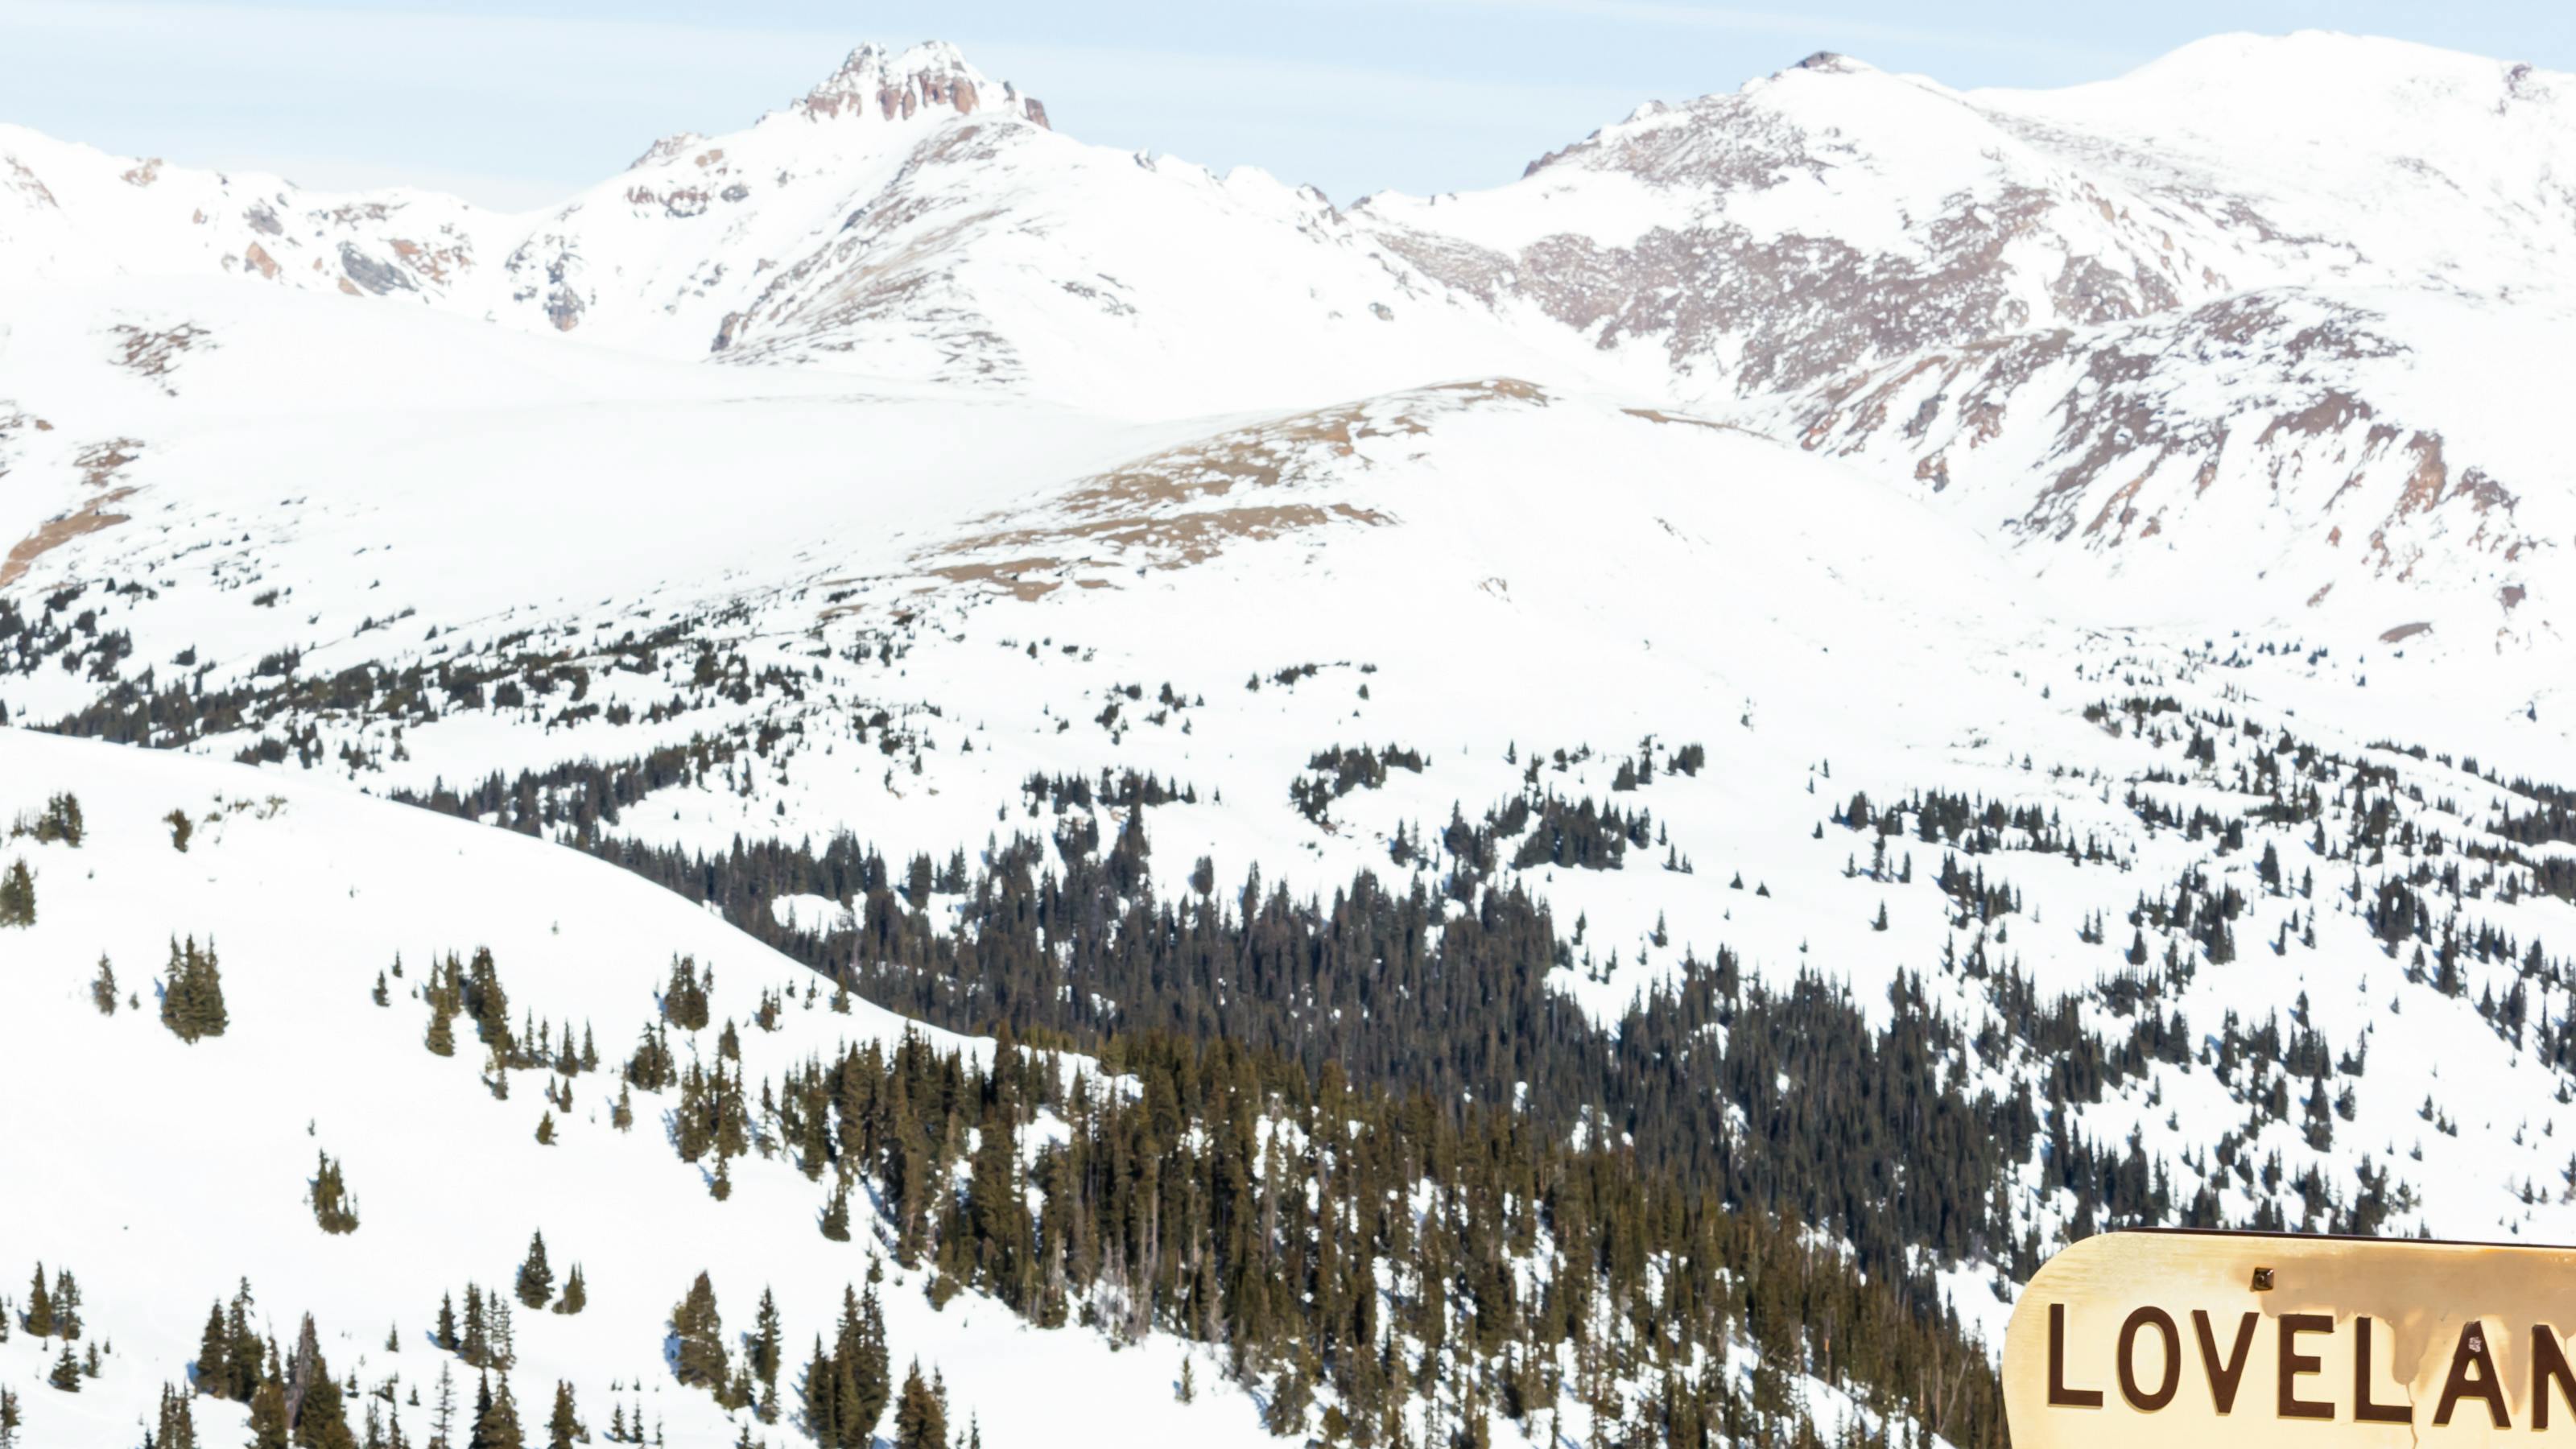 A snowy mountain range with a sign that says "Loveland Pass" in the bottom corner. 